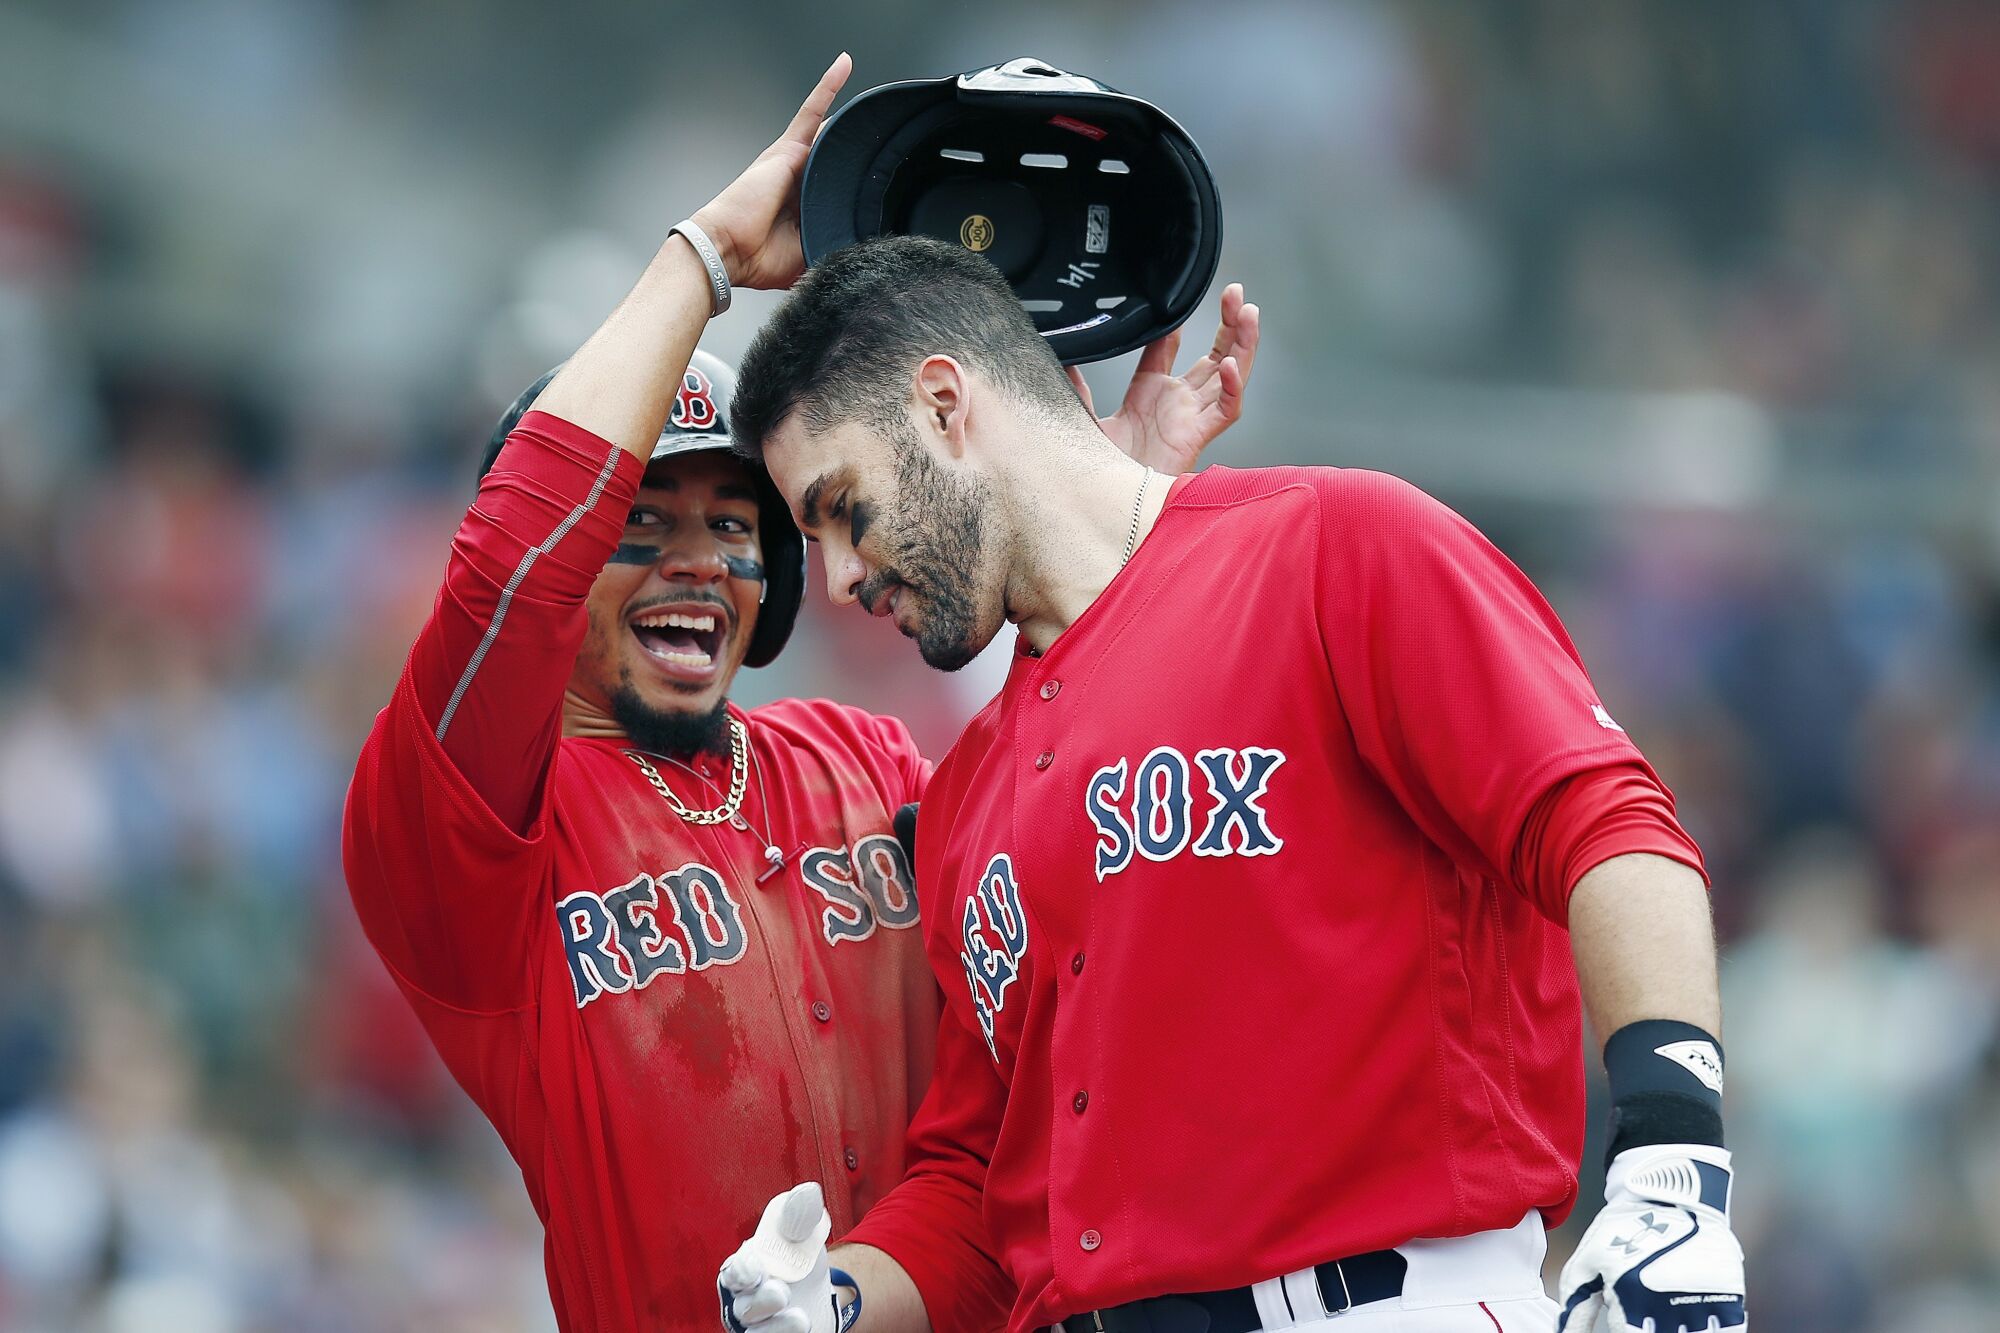 Boston Red Sox's Mookie Betts, left, celebrates a home run by J.D. Martinez against the Baltimore Orioles on Sept. 26, 2018.